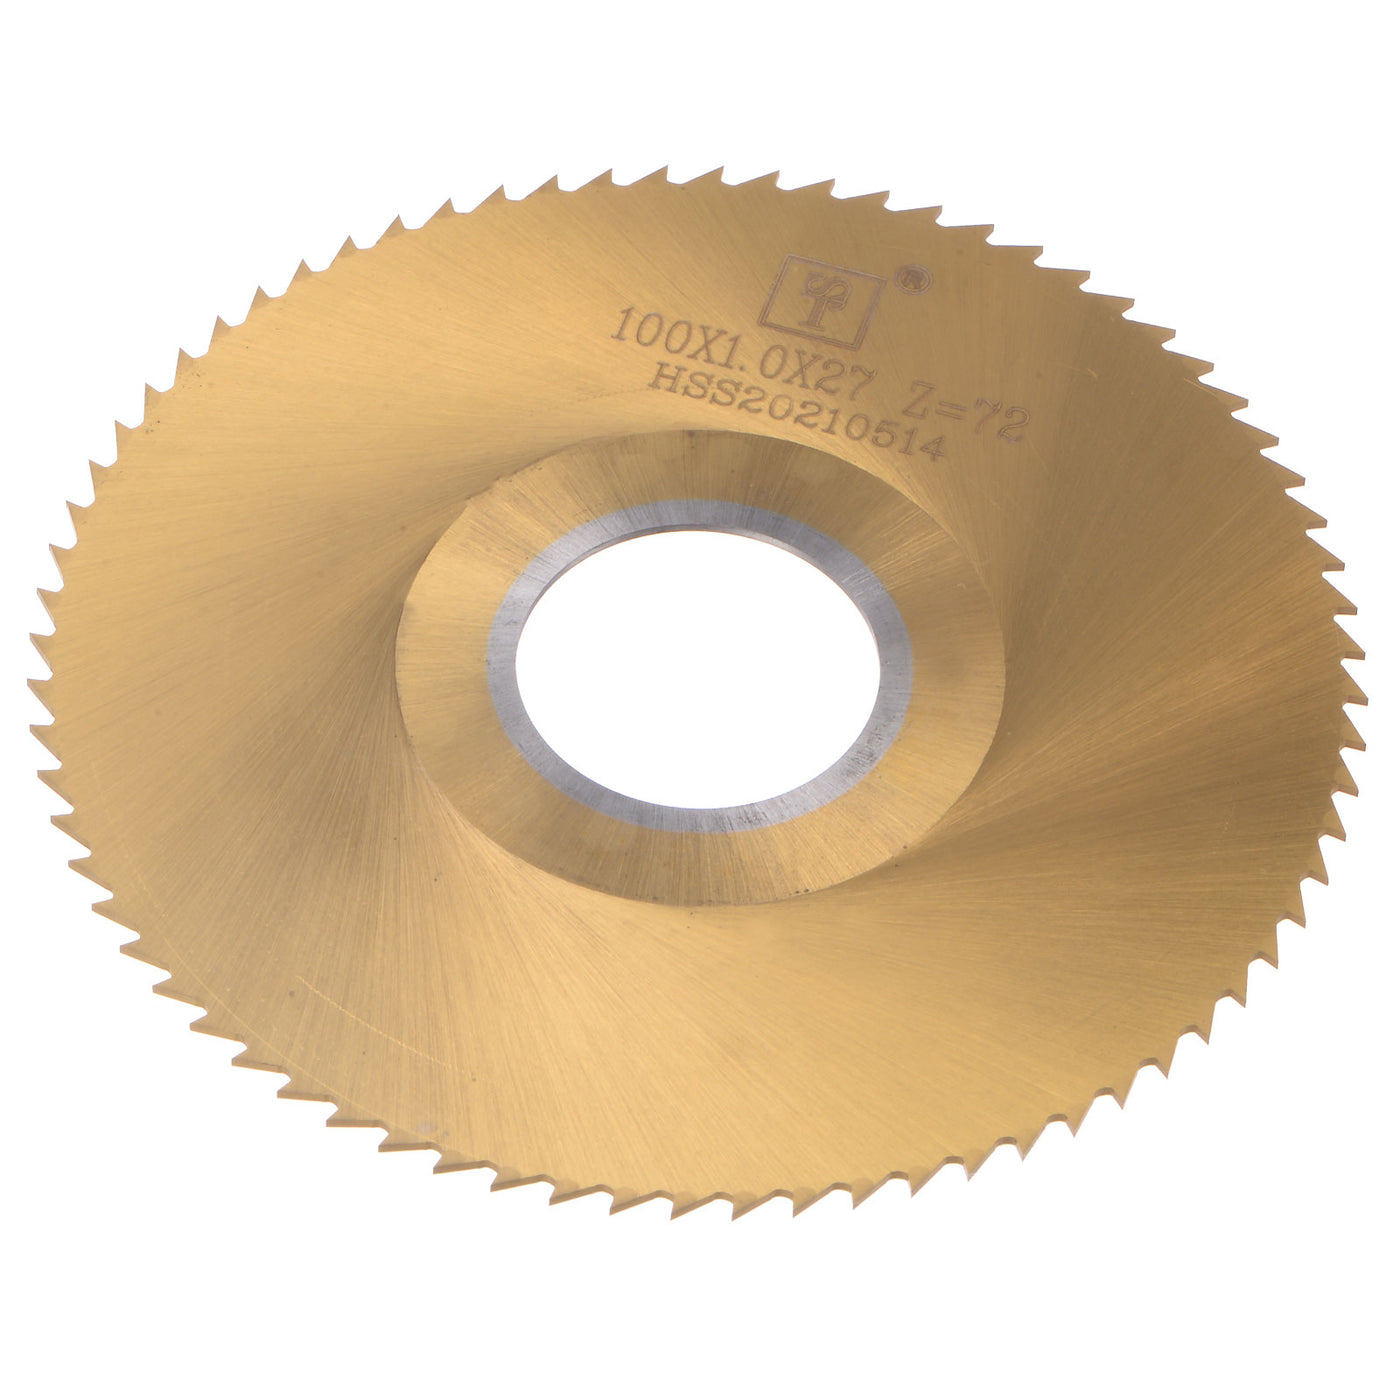 Uxcell Uxcell 100mm Dia 27mm Arbor 2.5mm Thick 72 Tooth Titanium Coated Circular Saw Blade